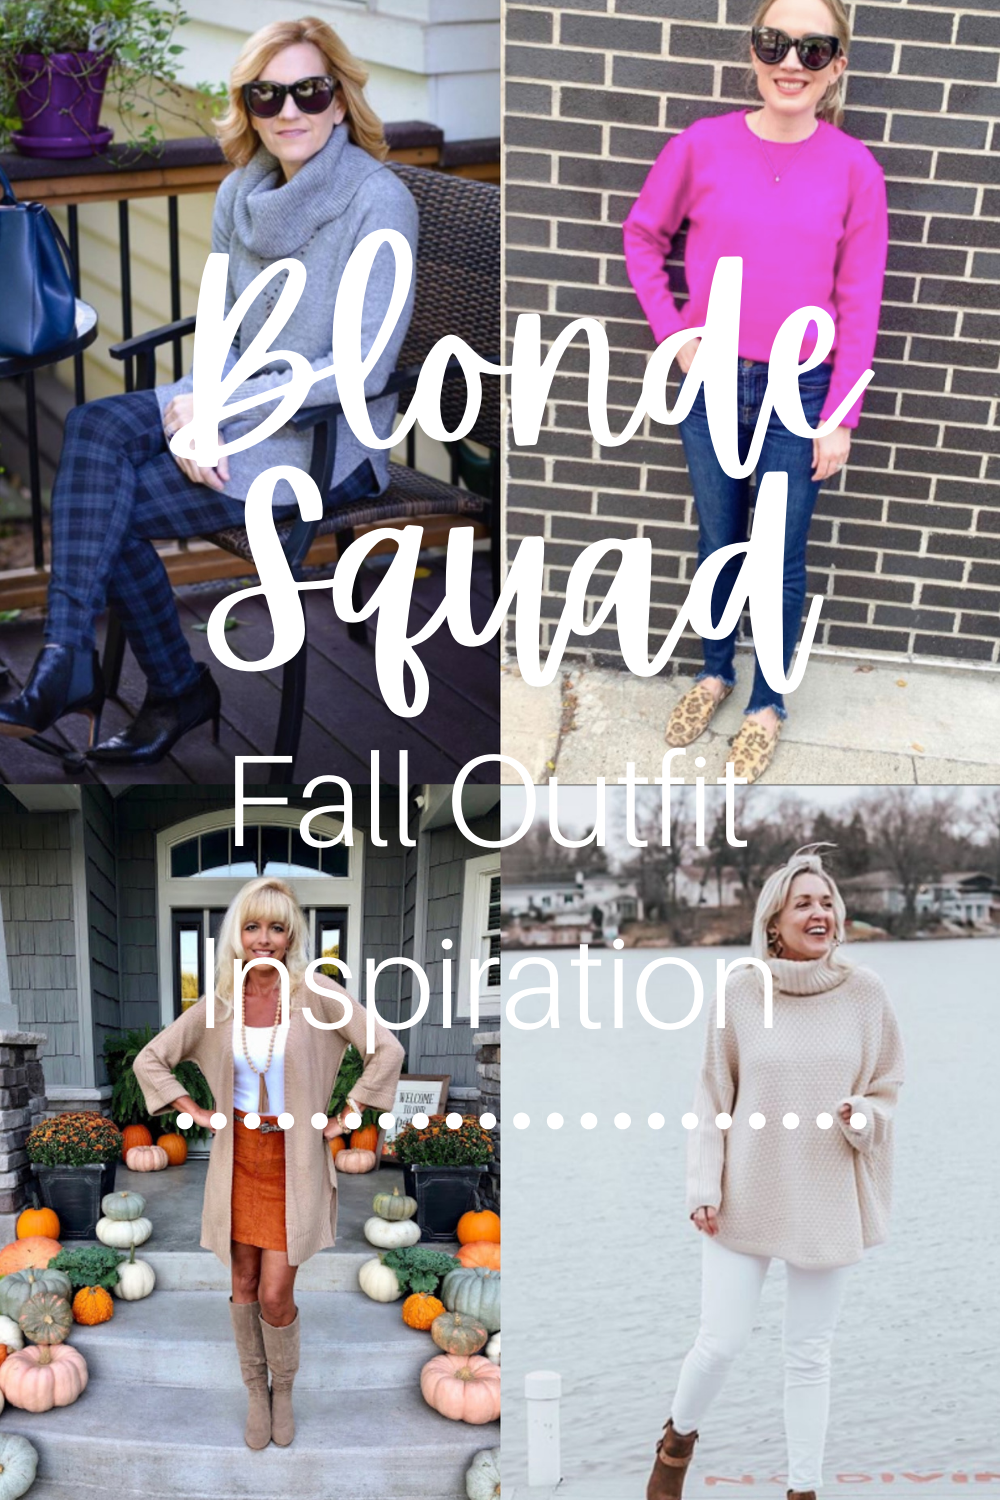 20 Fall Outfit Ideas from the Blonde Squad & Confident Twosday Linkup